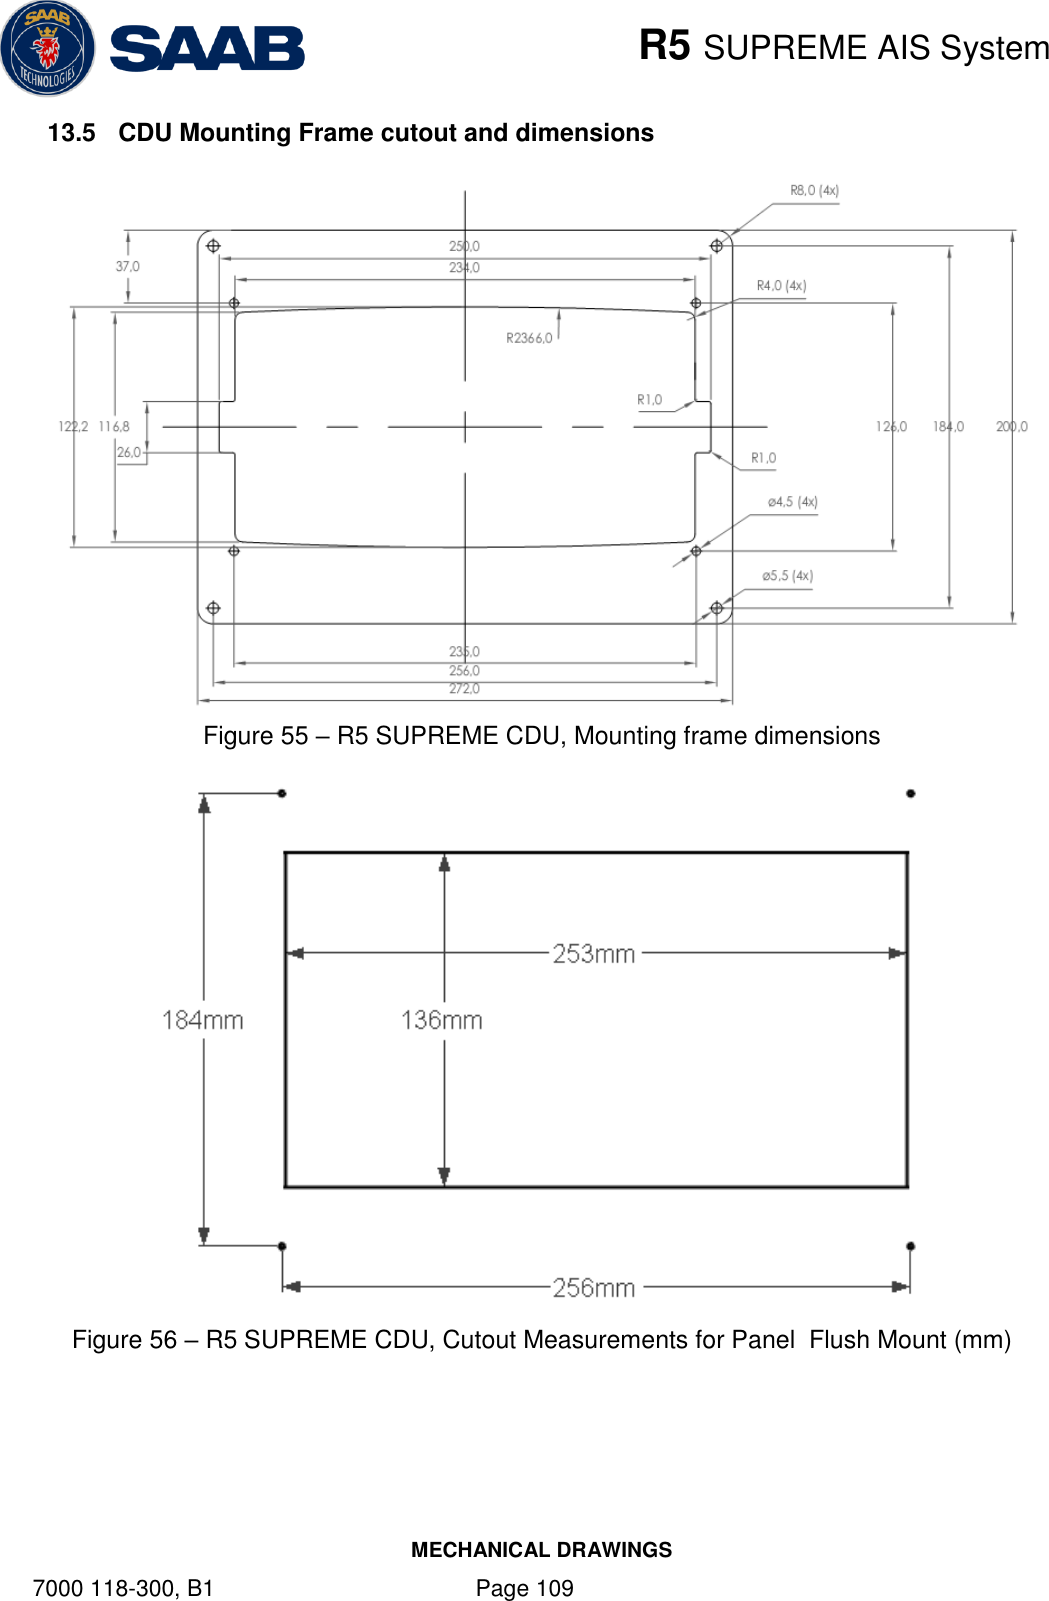    R5 SUPREME AIS System MECHANICAL DRAWINGS 7000 118-300, B1    Page 109 13.5  CDU Mounting Frame cutout and dimensions  Figure 55 – R5 SUPREME CDU, Mounting frame dimensions  Figure 56 – R5 SUPREME CDU, Cutout Measurements for Panel  Flush Mount (mm)    